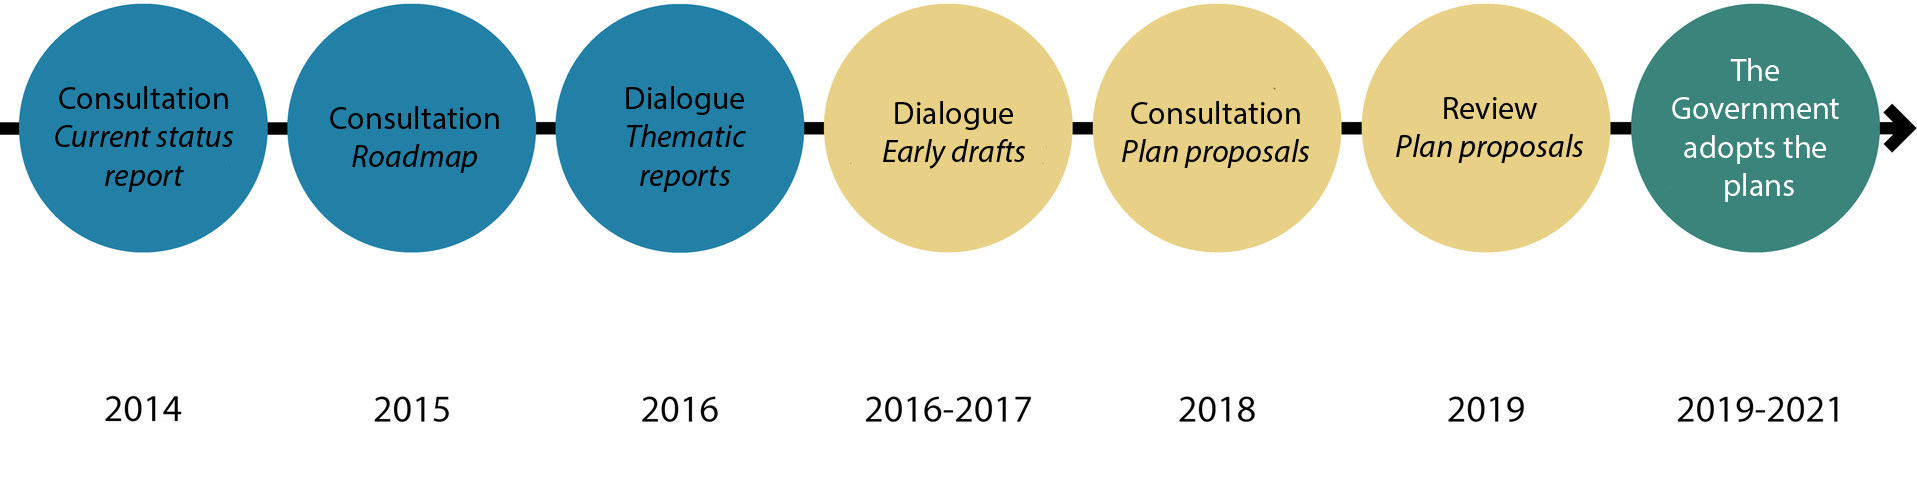 Figure illustrating the dialogue steps of the first planning cycle. Three blue circles illustrate the three dialogue steps of the preparatory phase: Consultation on the current status report (2014), consultation on a roadmap (2015) and dialogue about thematic reports (2016). Three yellow circles illustrate the three dialogue steps of the process of developing plan proposals: dialogue about early drafts (2016-2017), consultation on plan proposals (2018) and review of plan proposals (2019). A green circle illustrates the preparation and adoption of the Government (2020-2021).